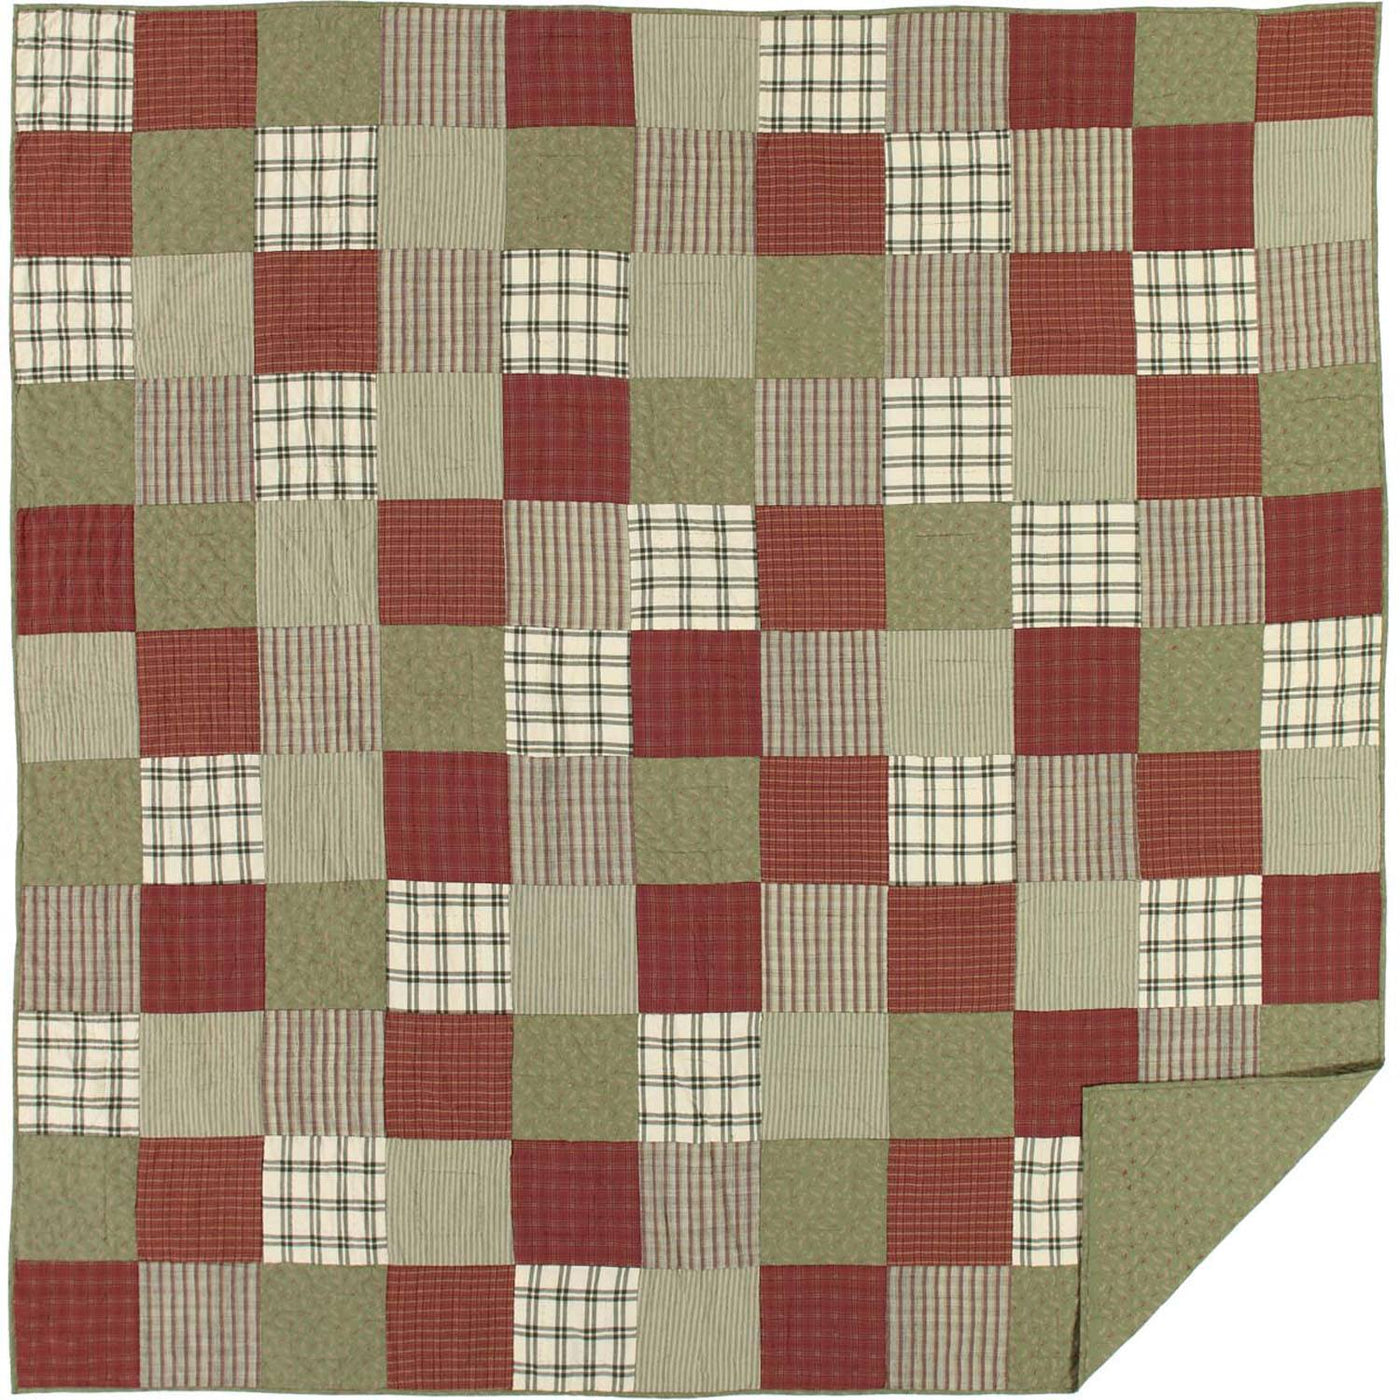 Mayfred Queen Quilt - Khaki/Barn Red